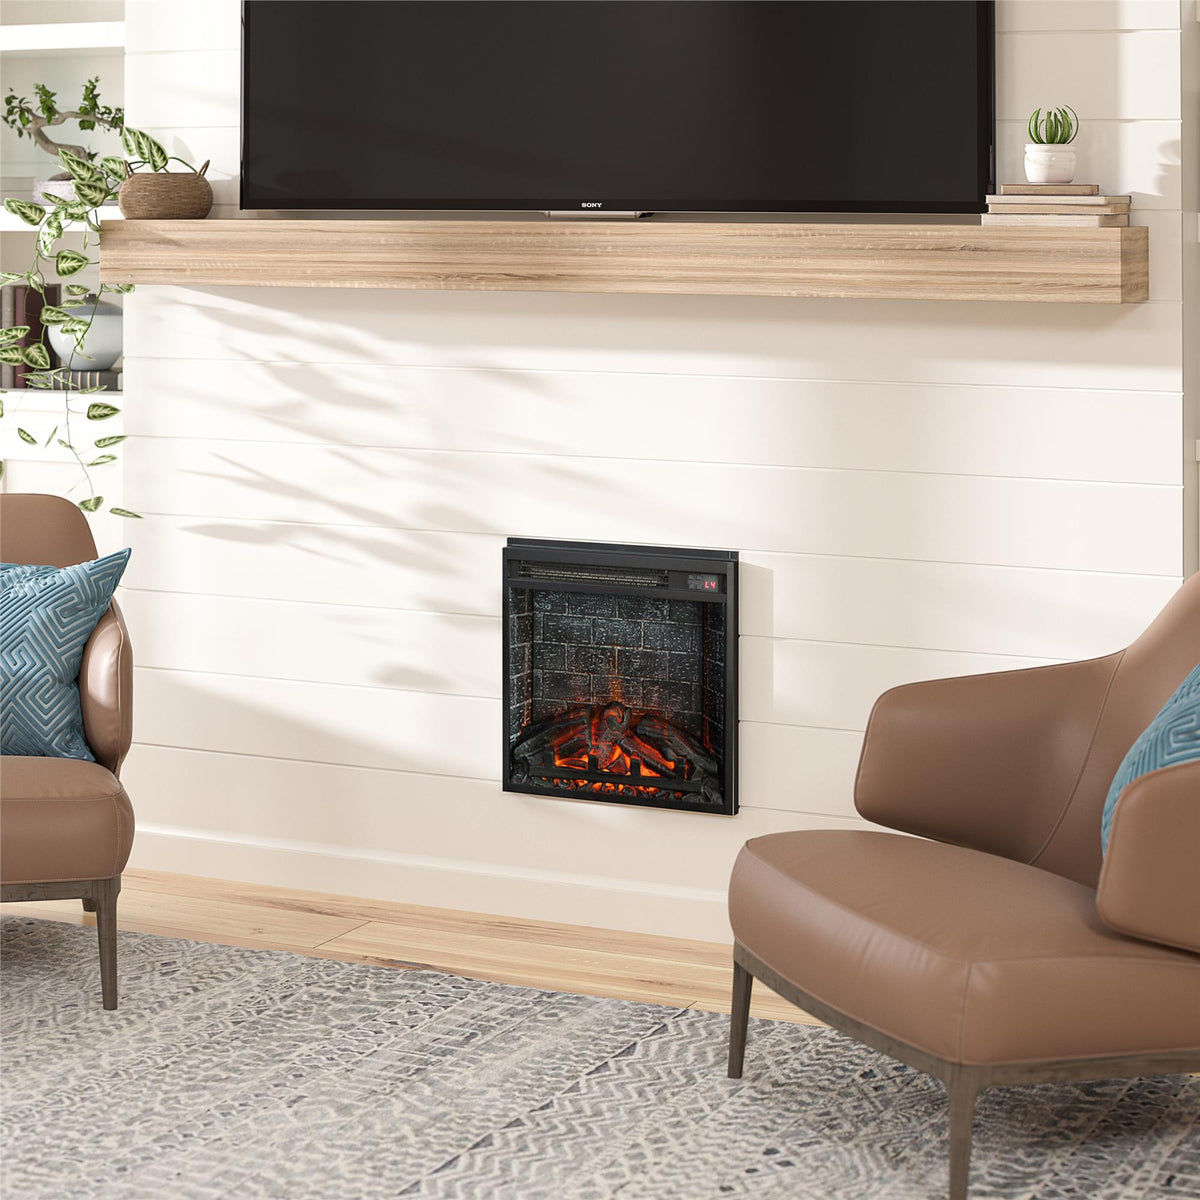 18 inch Electric Glass Front Fireplace Insert with Remote, Black 